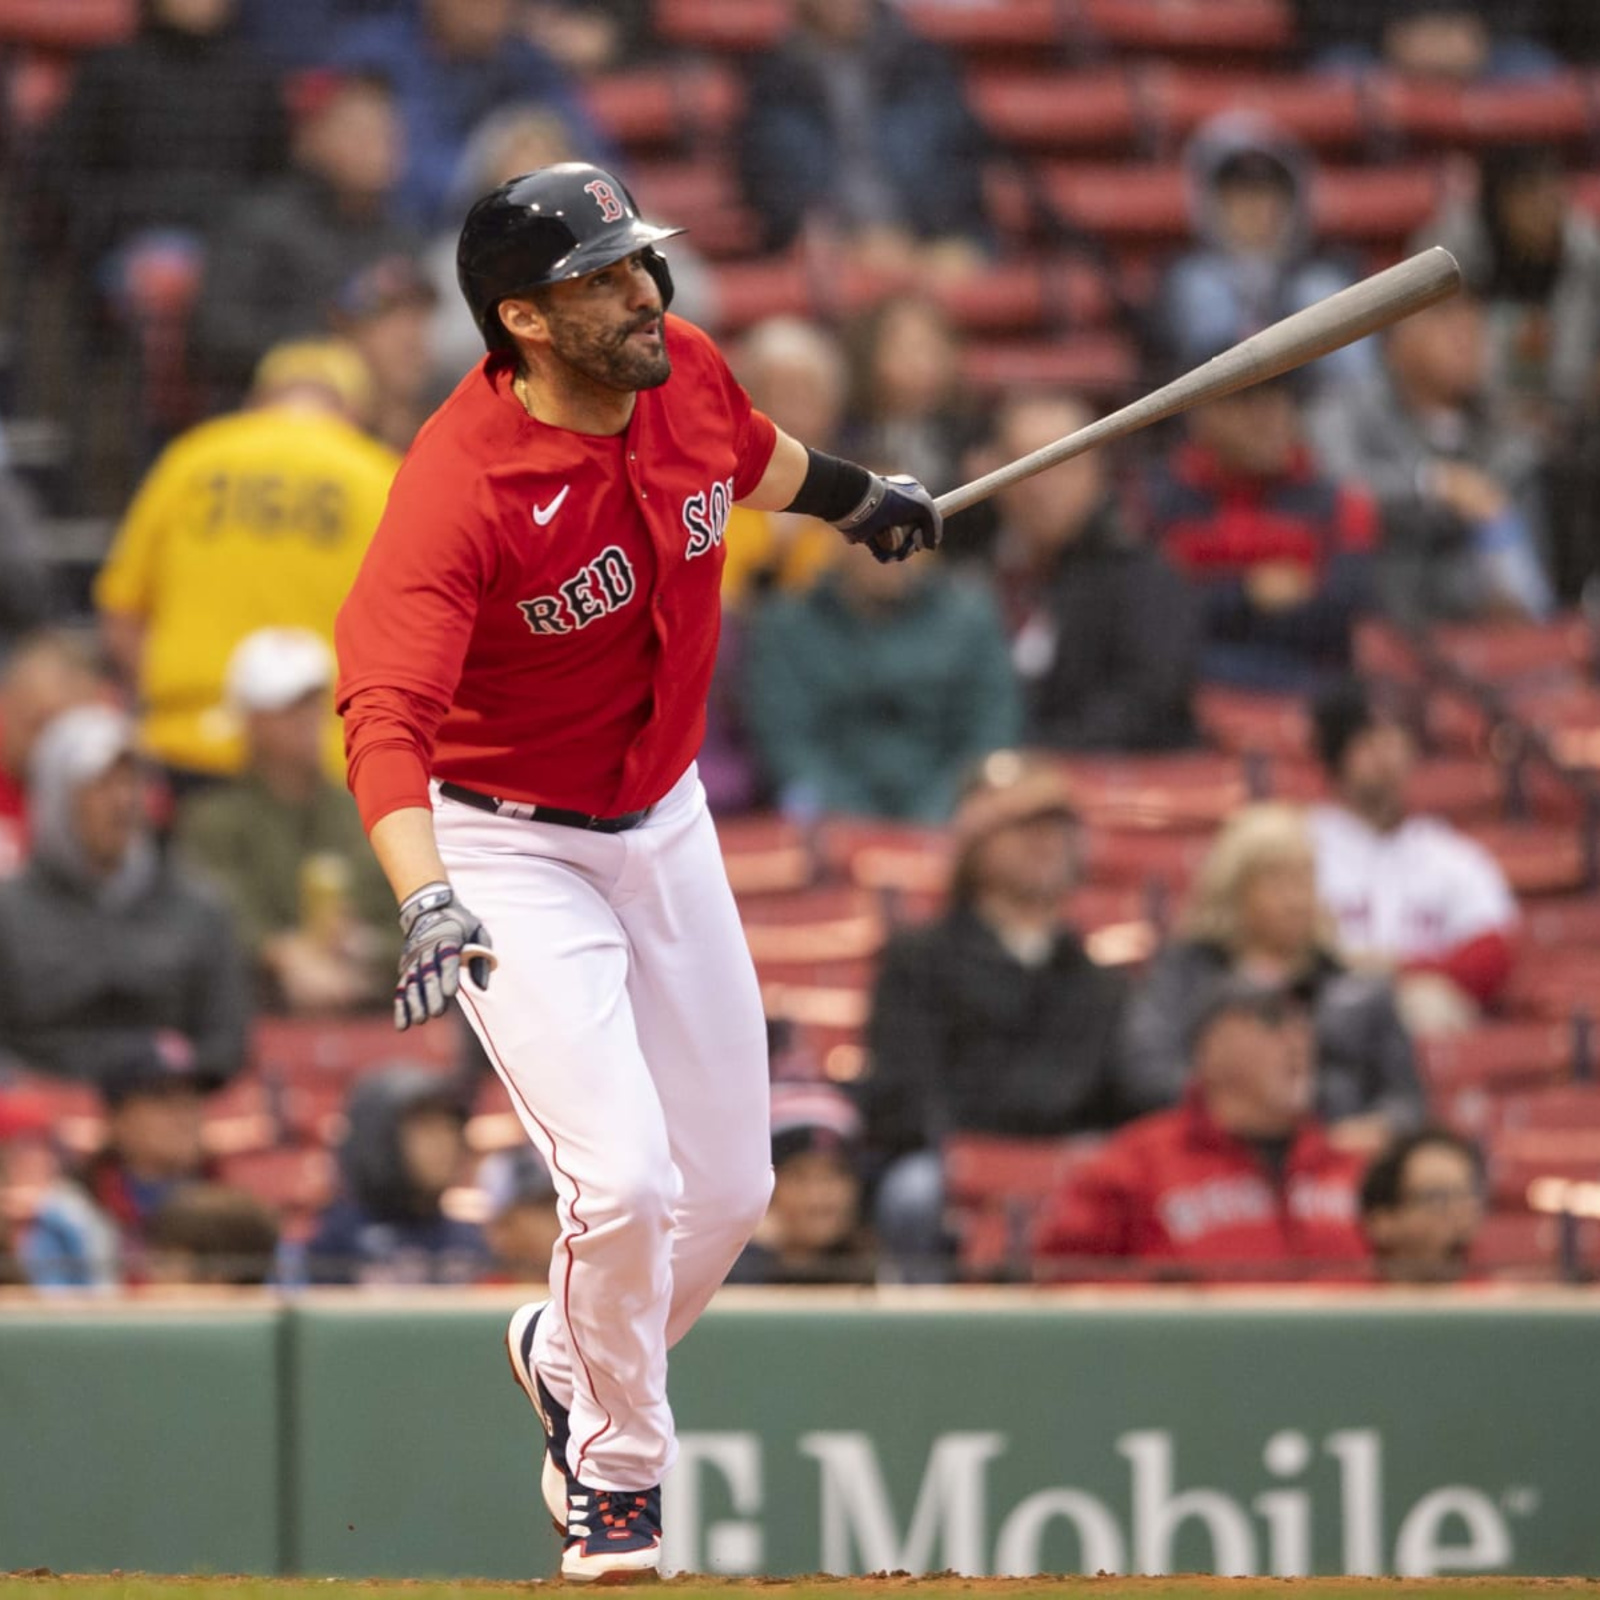 Report: Dodgers, DH J.D. Martinez agree to 1-year, $10M contract